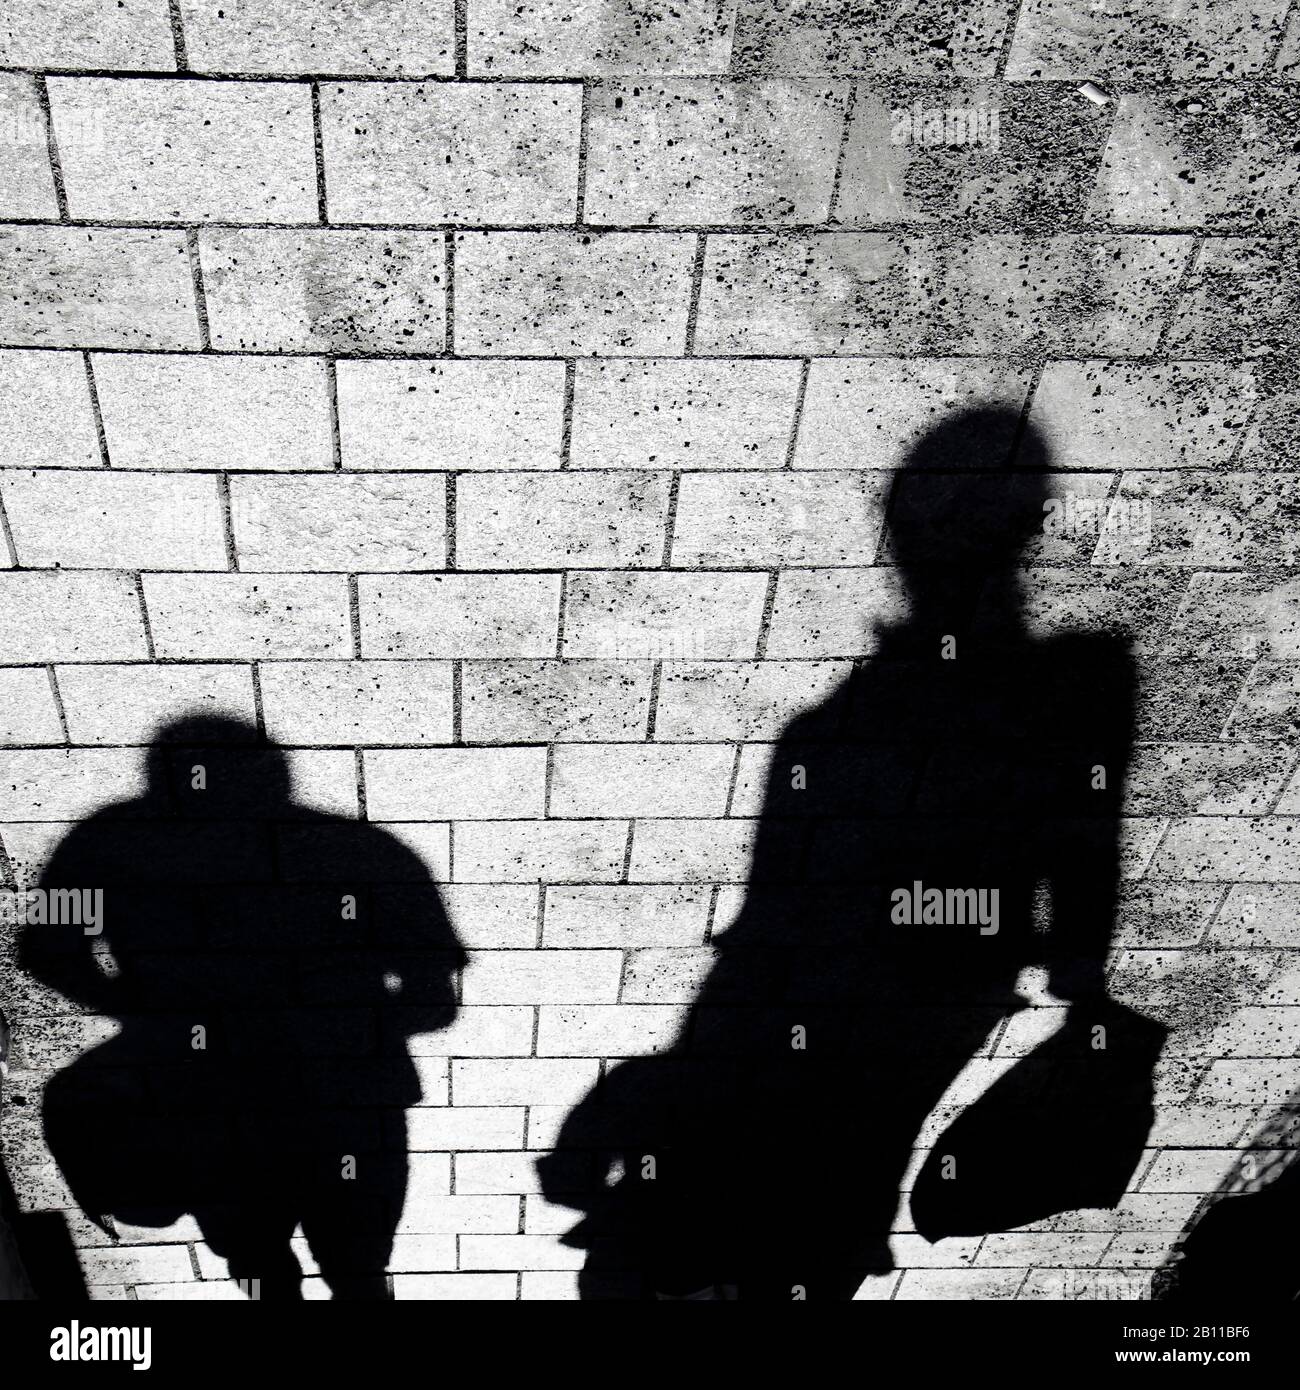 Blurry shadow silhouette of people walking on city street sidewalk in high contrast black and white, upside down Stock Photo